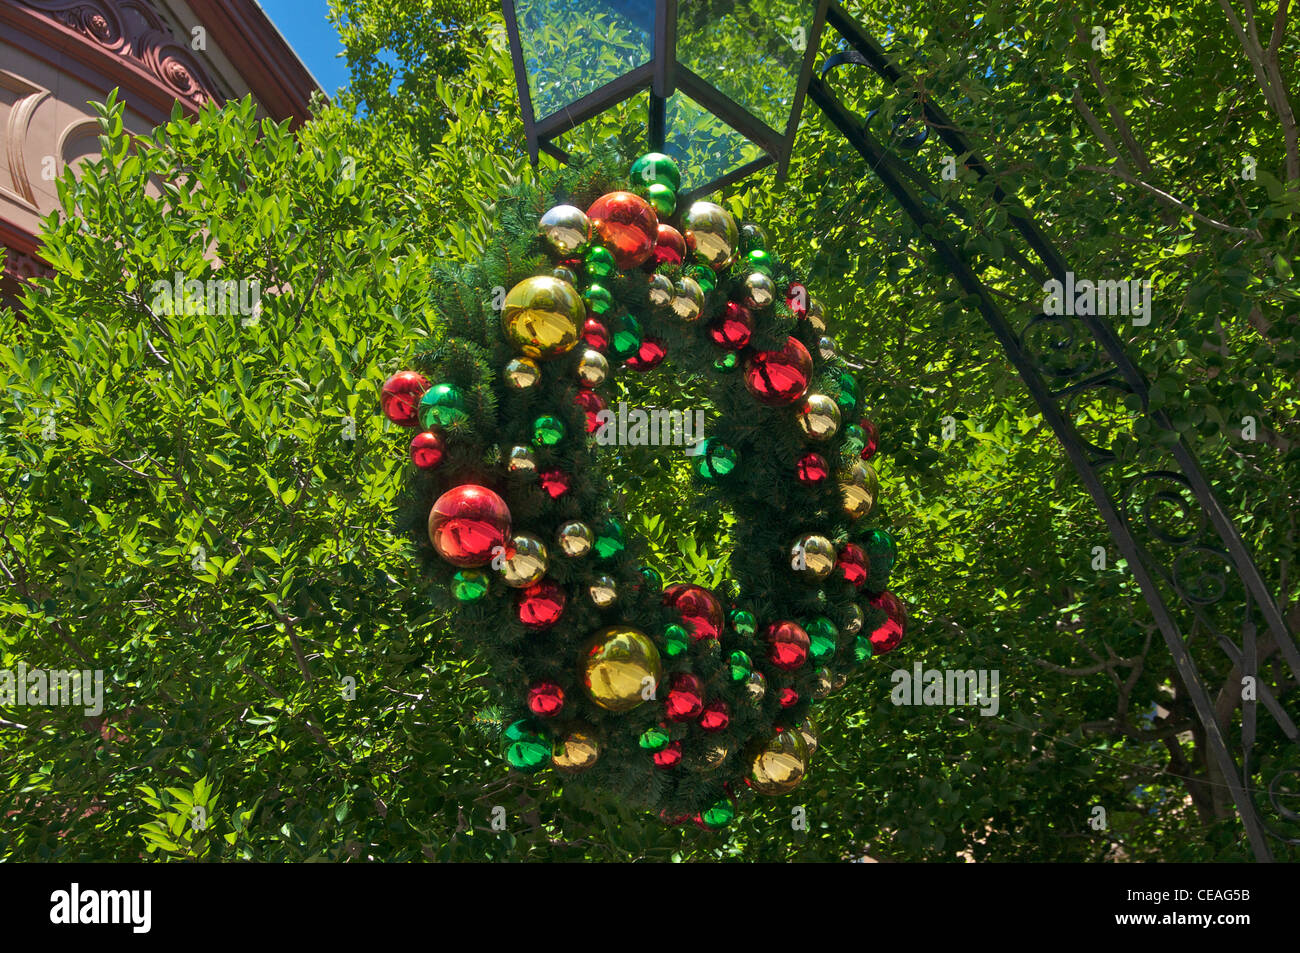 Christmas Wreath With Colourful Decorations Hanging From A Lamp